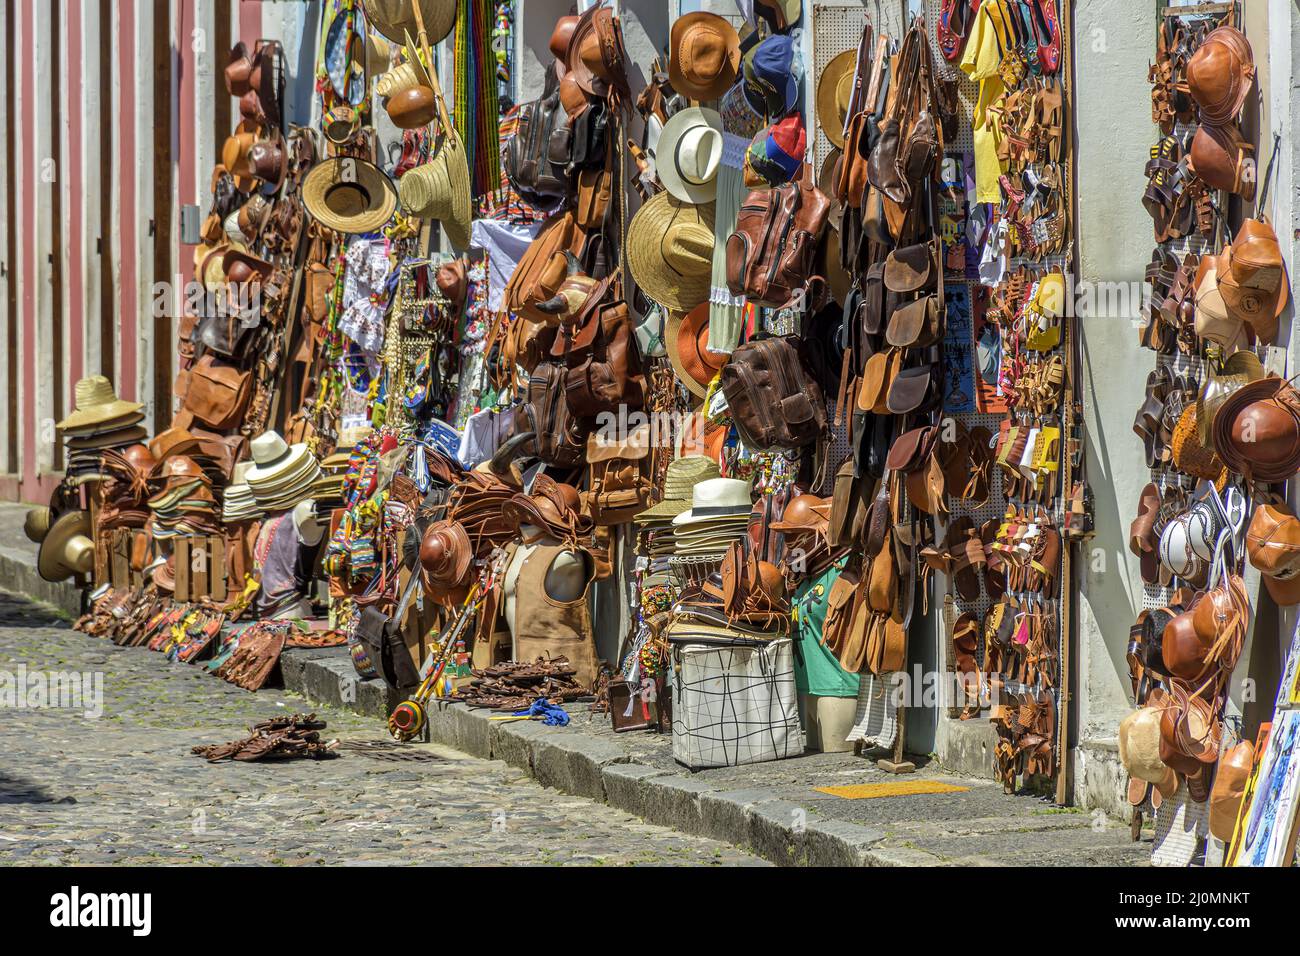 Commerce of typical products, souvenirs and musical instruments of various types on the streets of Pelourinho Stock Photo